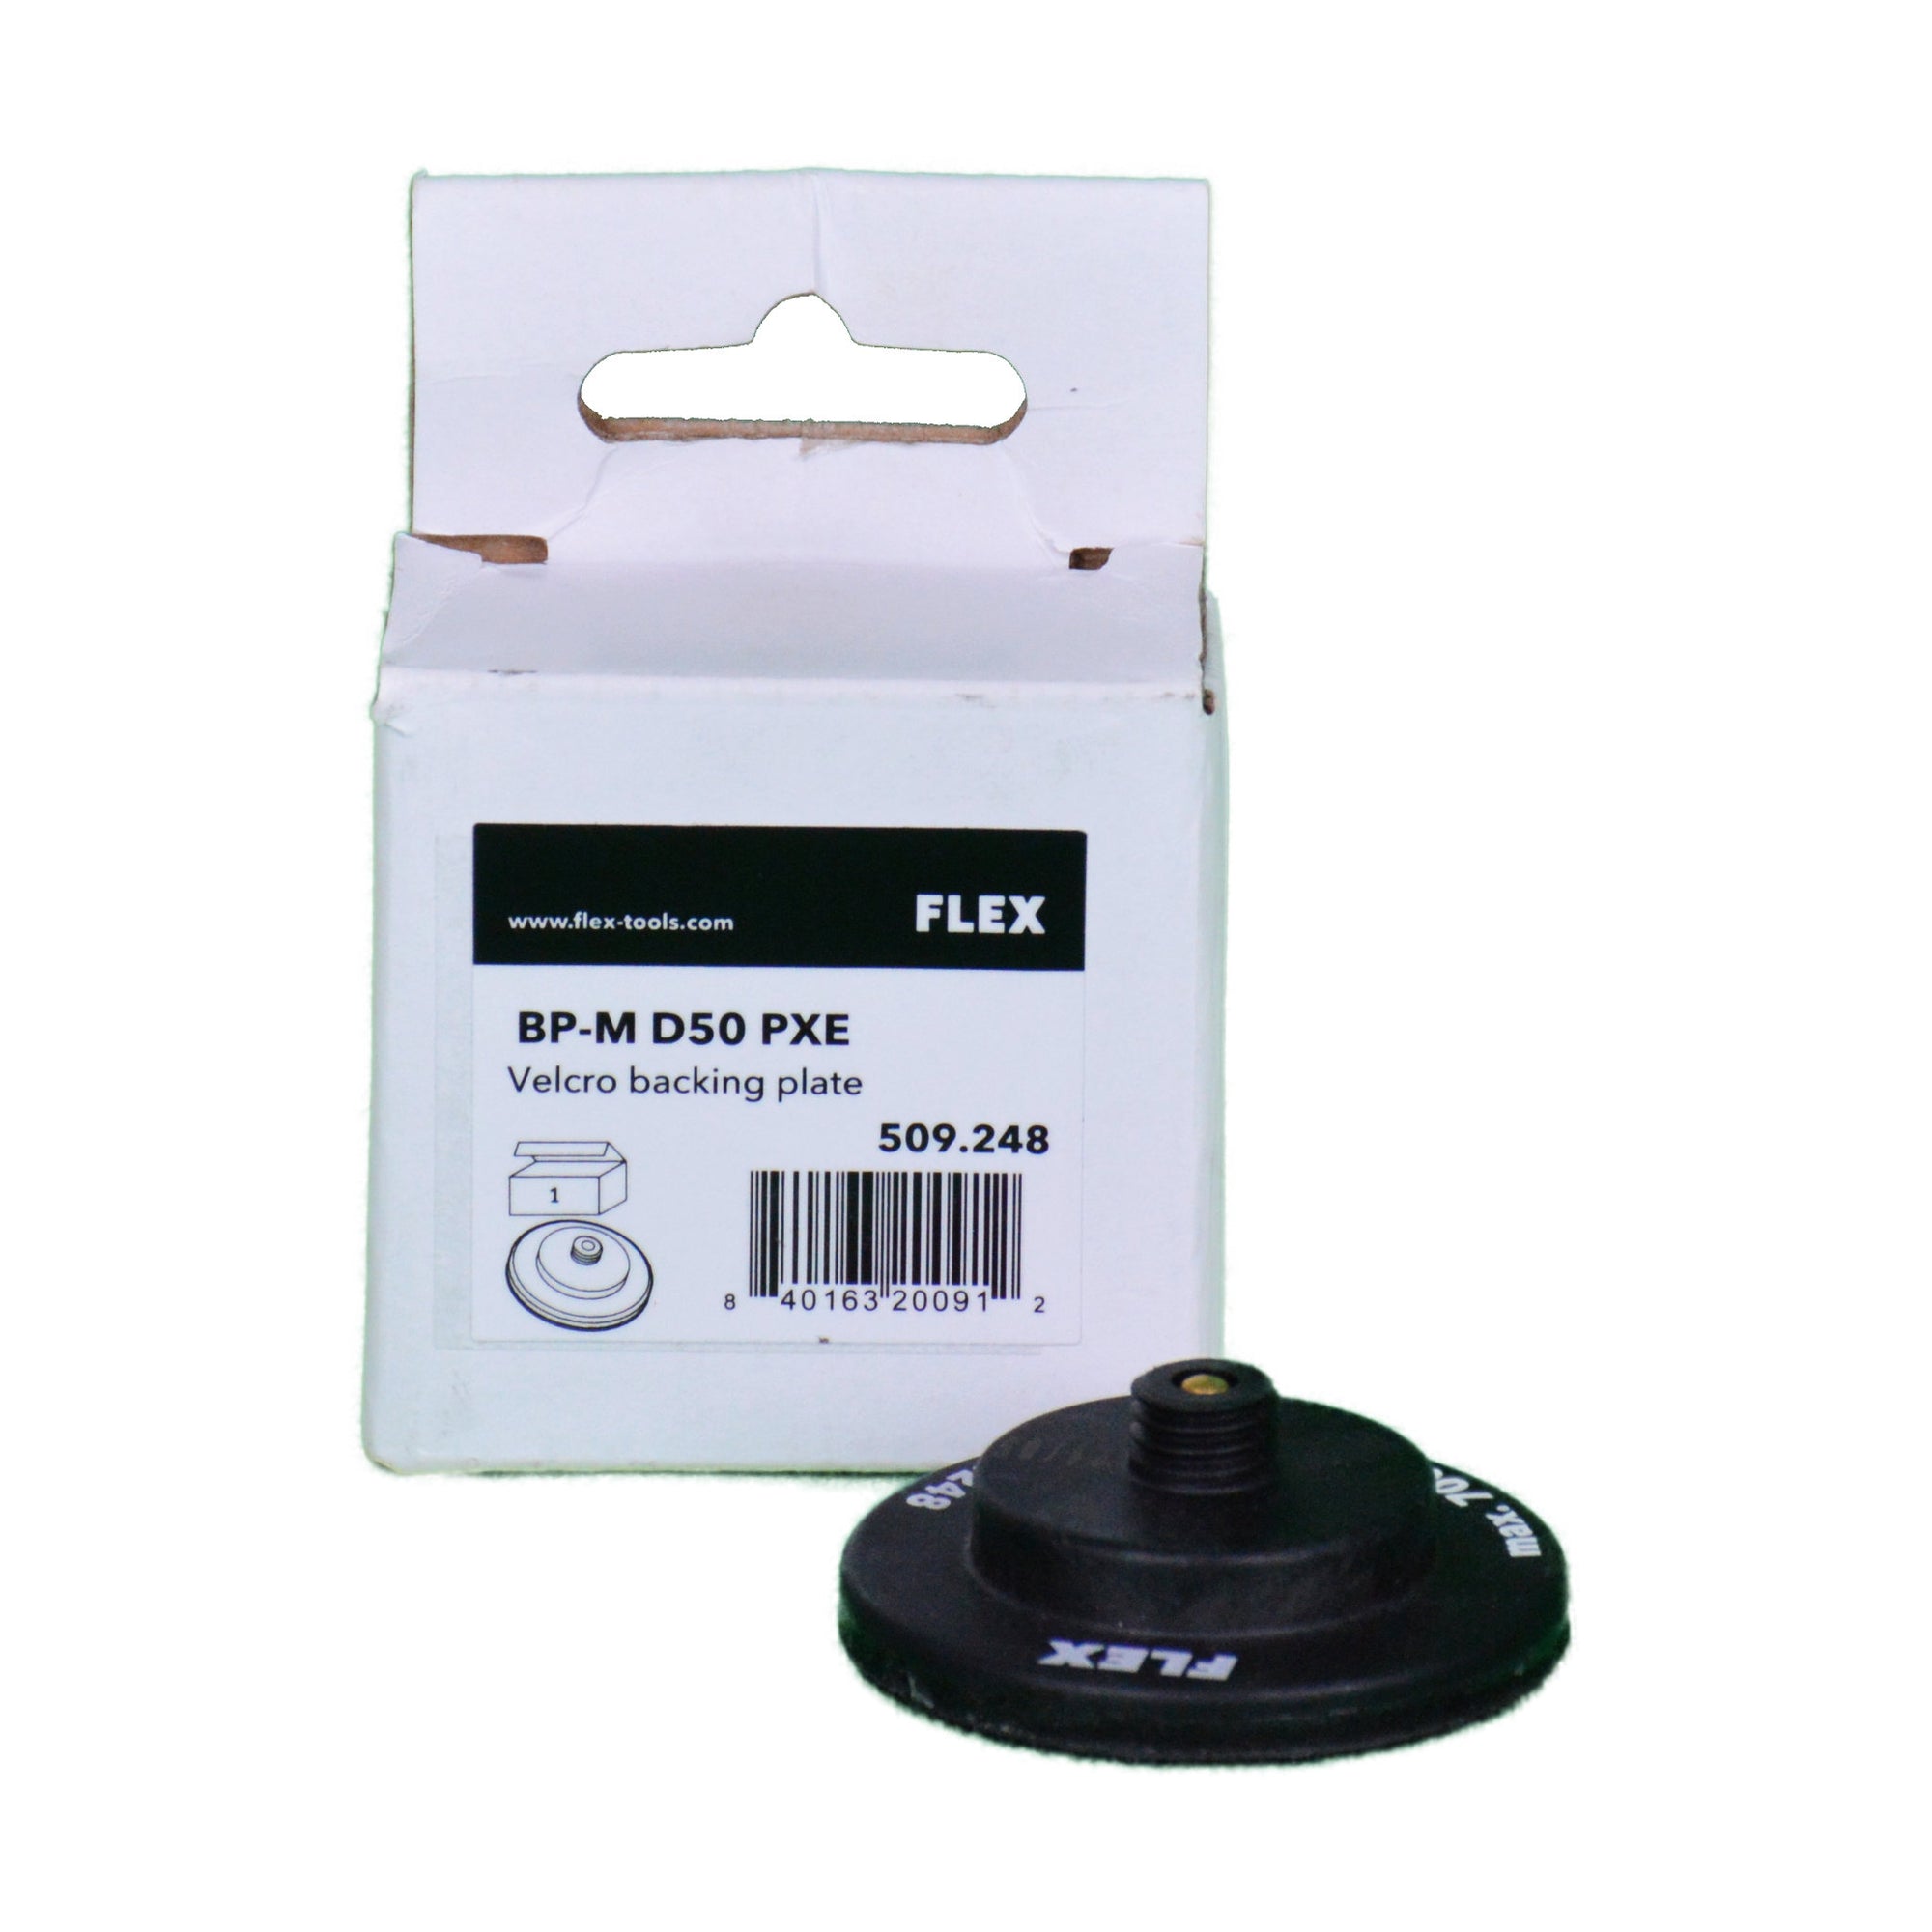 2 Inch Backing Plate for FLEX PXE 80